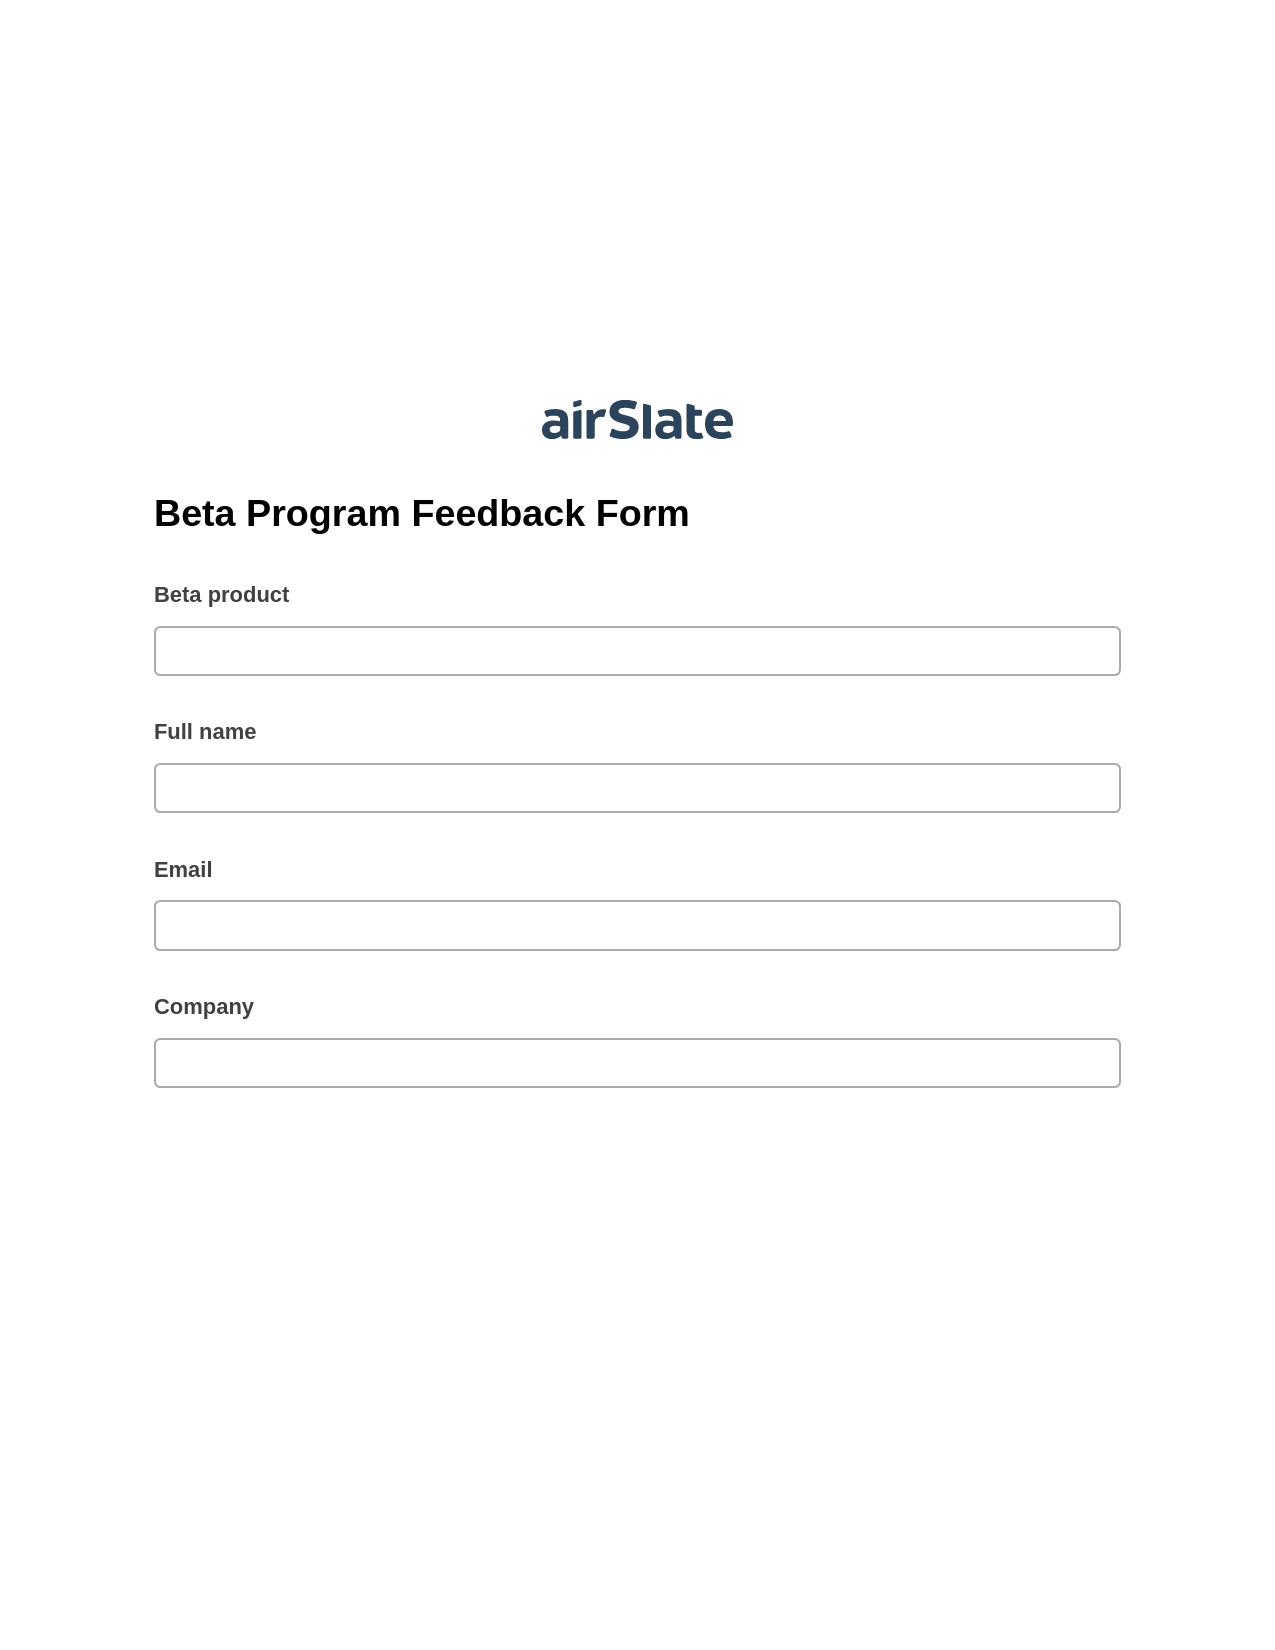 Beta Program Feedback Form Pre-fill Slate from MS Dynamics 365 Records Bot, Hide Signatures Bot, Email Notification Postfinish Bot